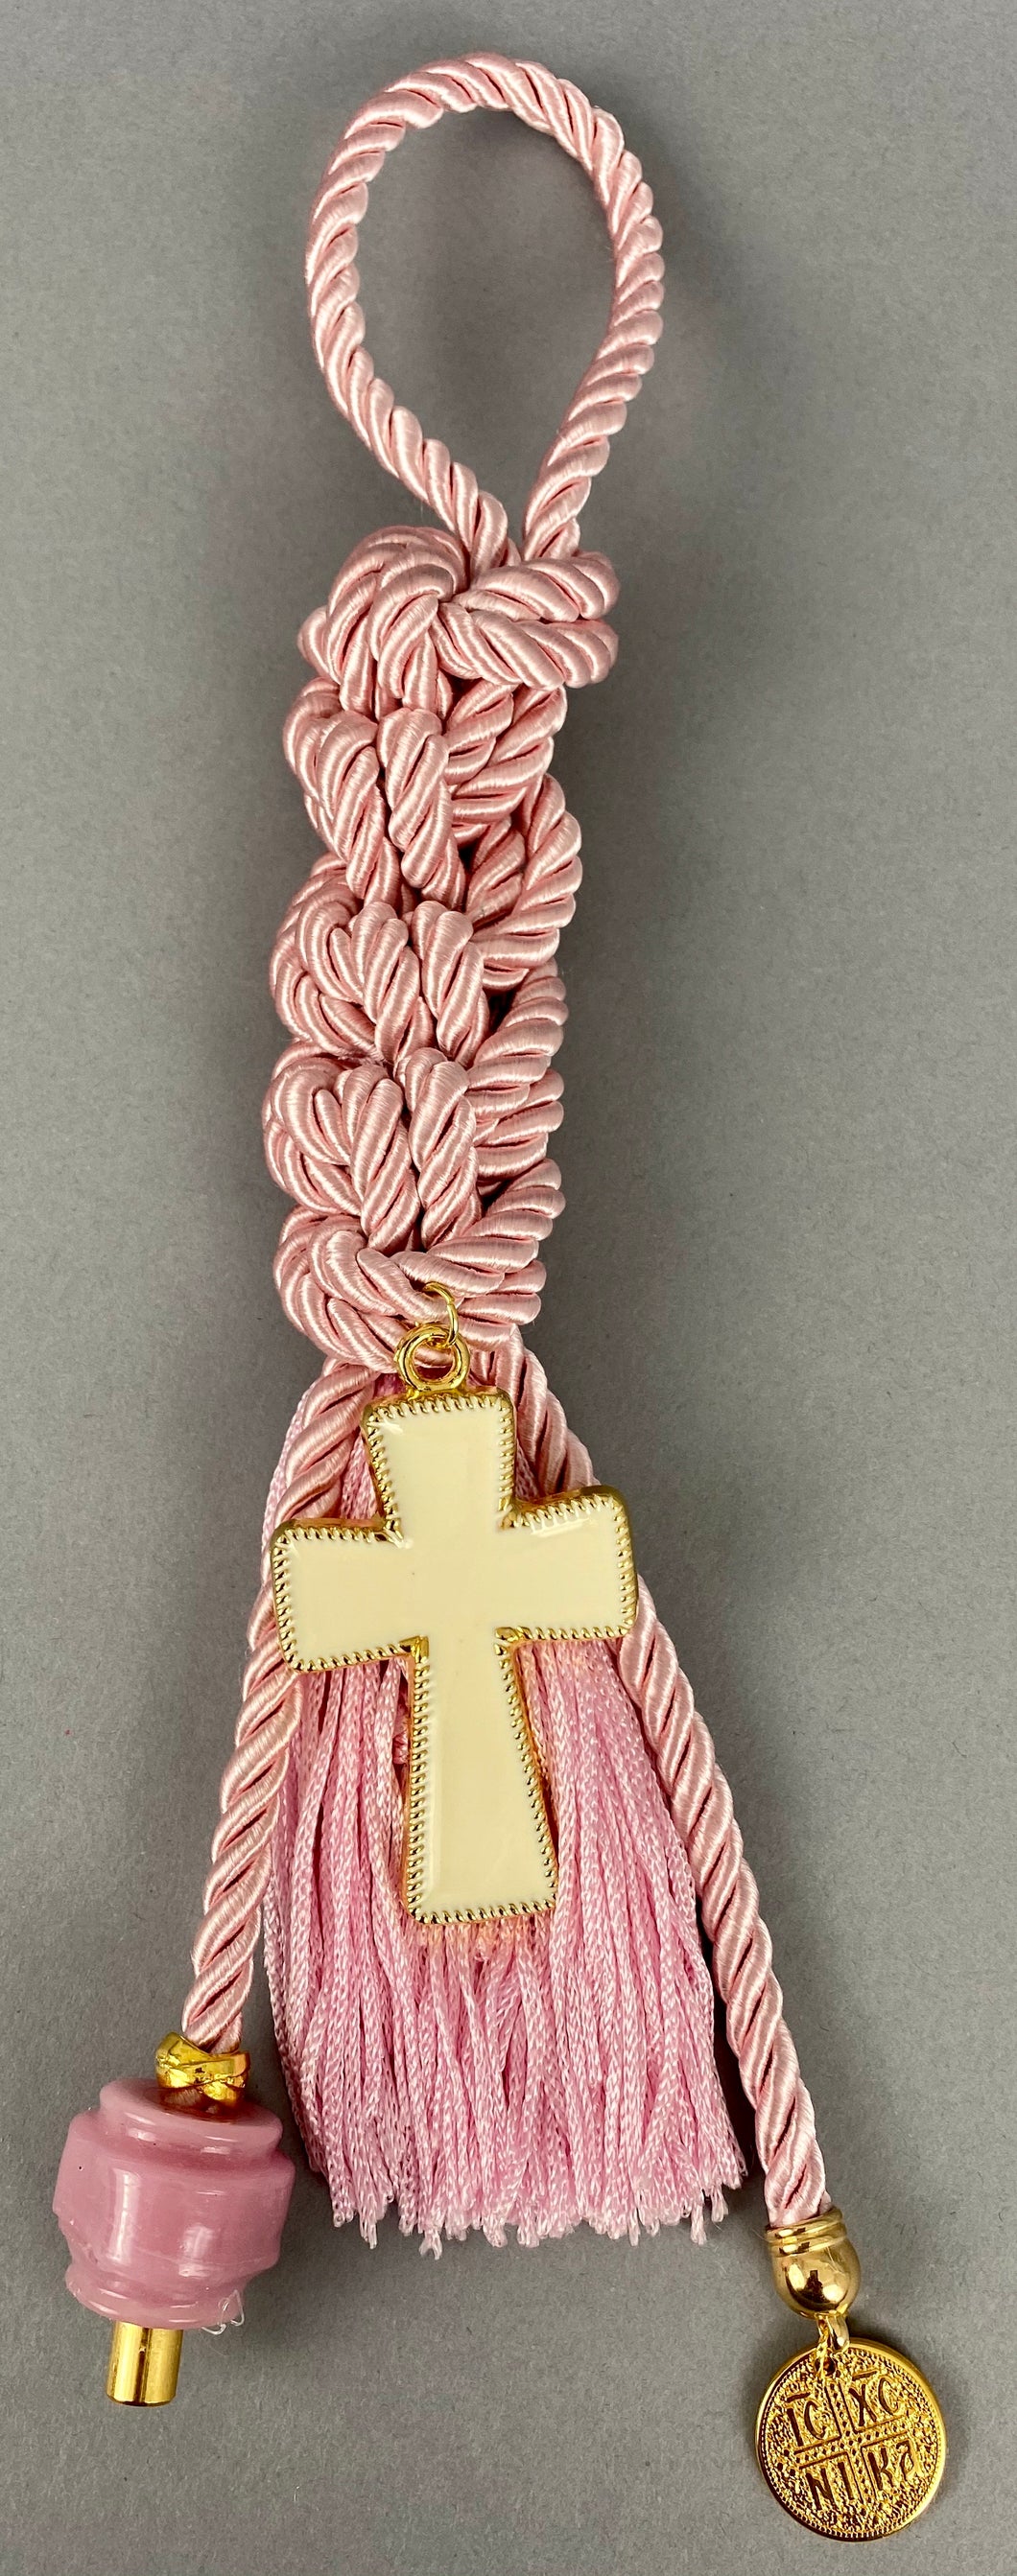 Gouri 1005 Pearl Baby Pink Cord Gouri, large metal Cross, double sided Konstantinata pendant, large glass beads and extra long Tassel.  Measures 13.5” in length.